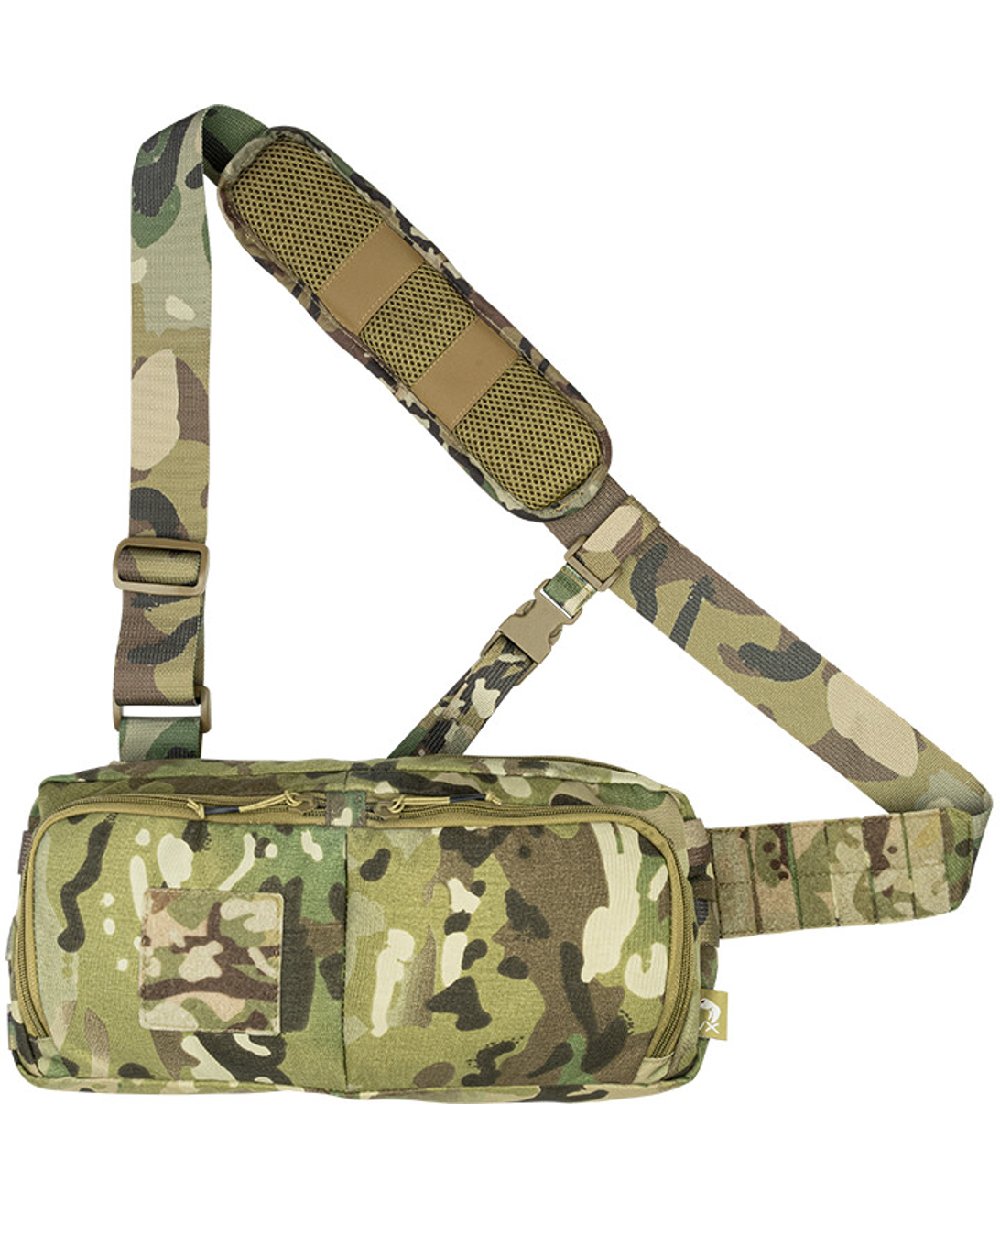 Viper VX Buckle Up Sling Pack in VCAM 